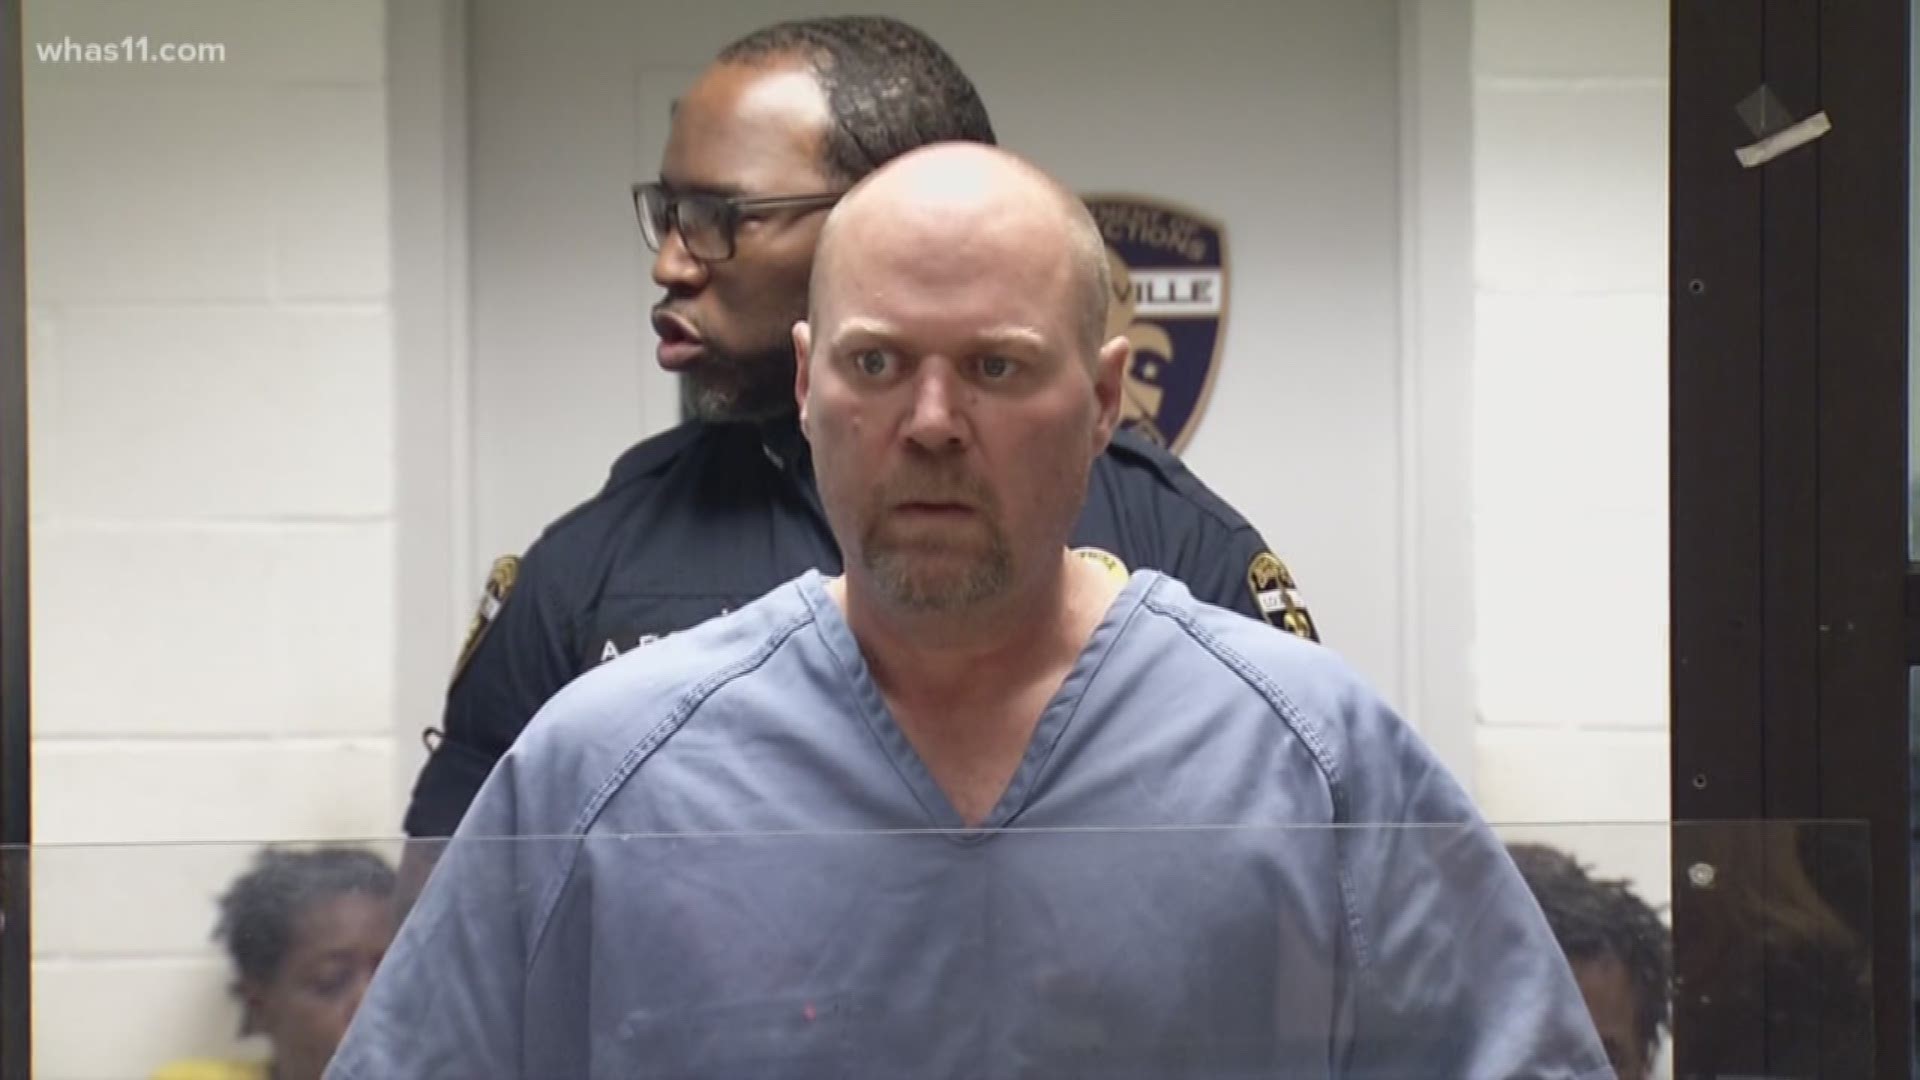 A federal grand jury has indicted Gregory Bush on federal hate crime charges in connection to the deadly shooting at the Kroger in Jeffersontown last month.